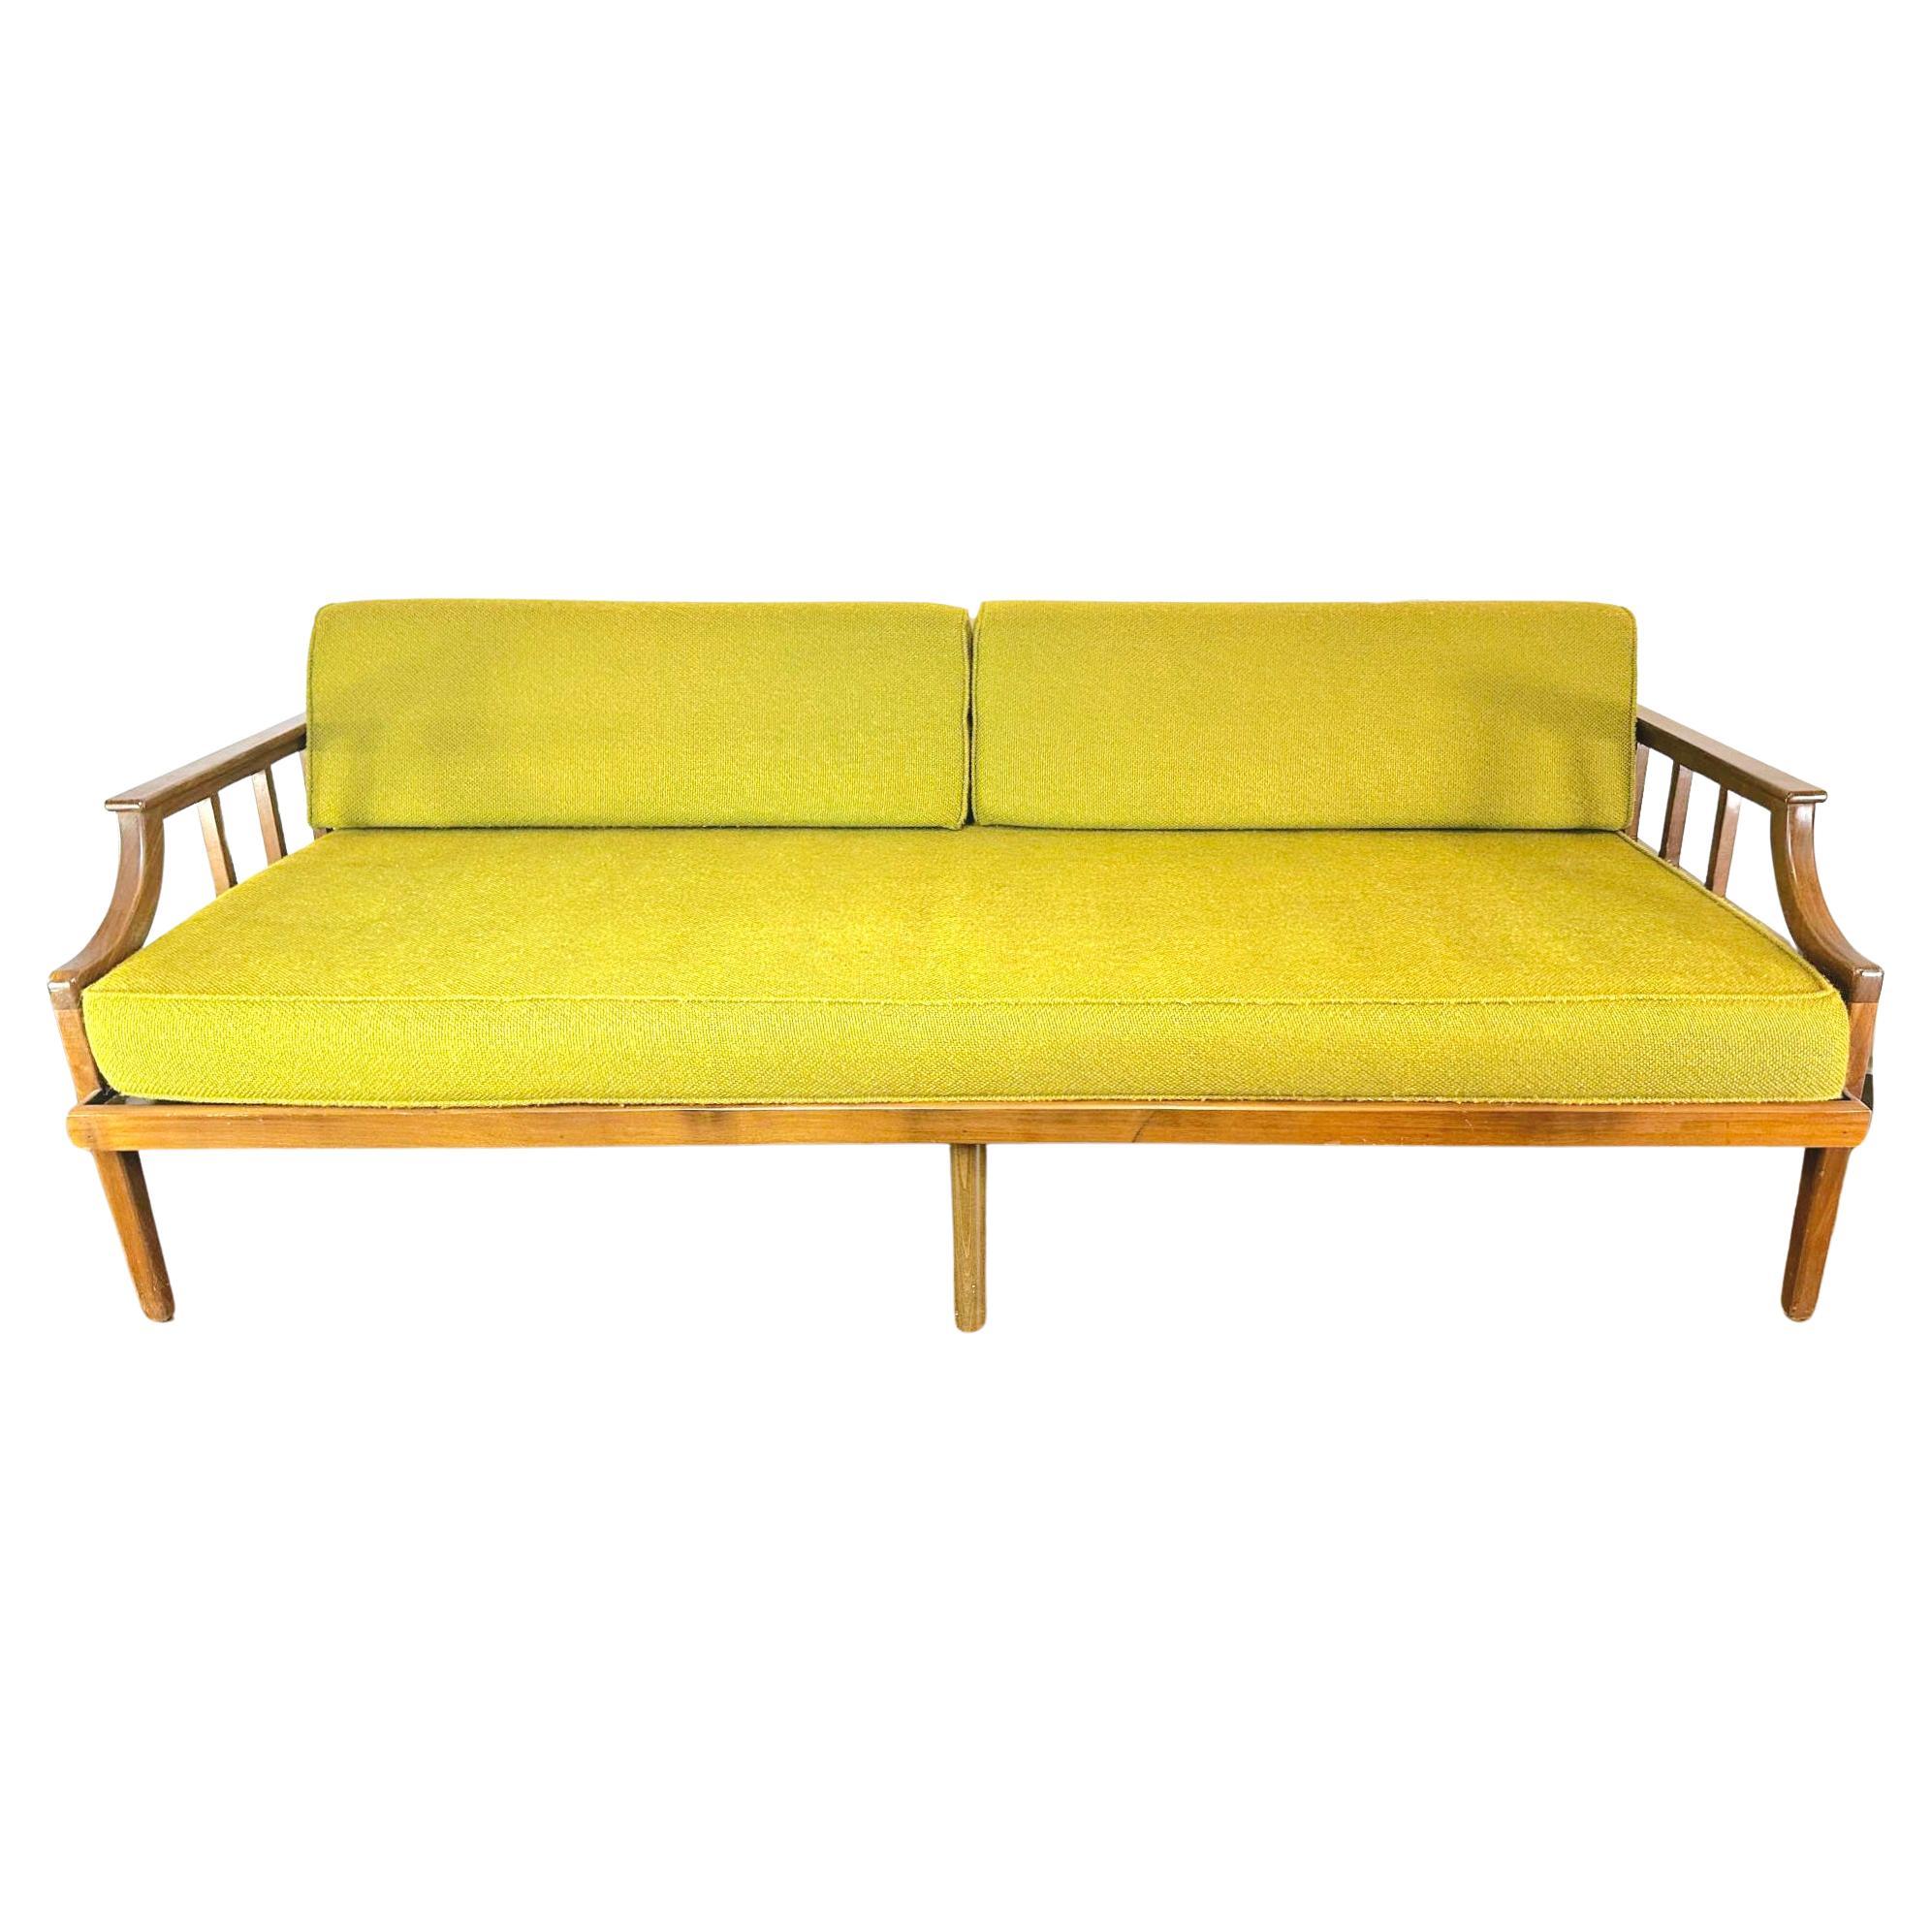 1966 Teak Green Sofa / Loveseat / Daybed For Sale